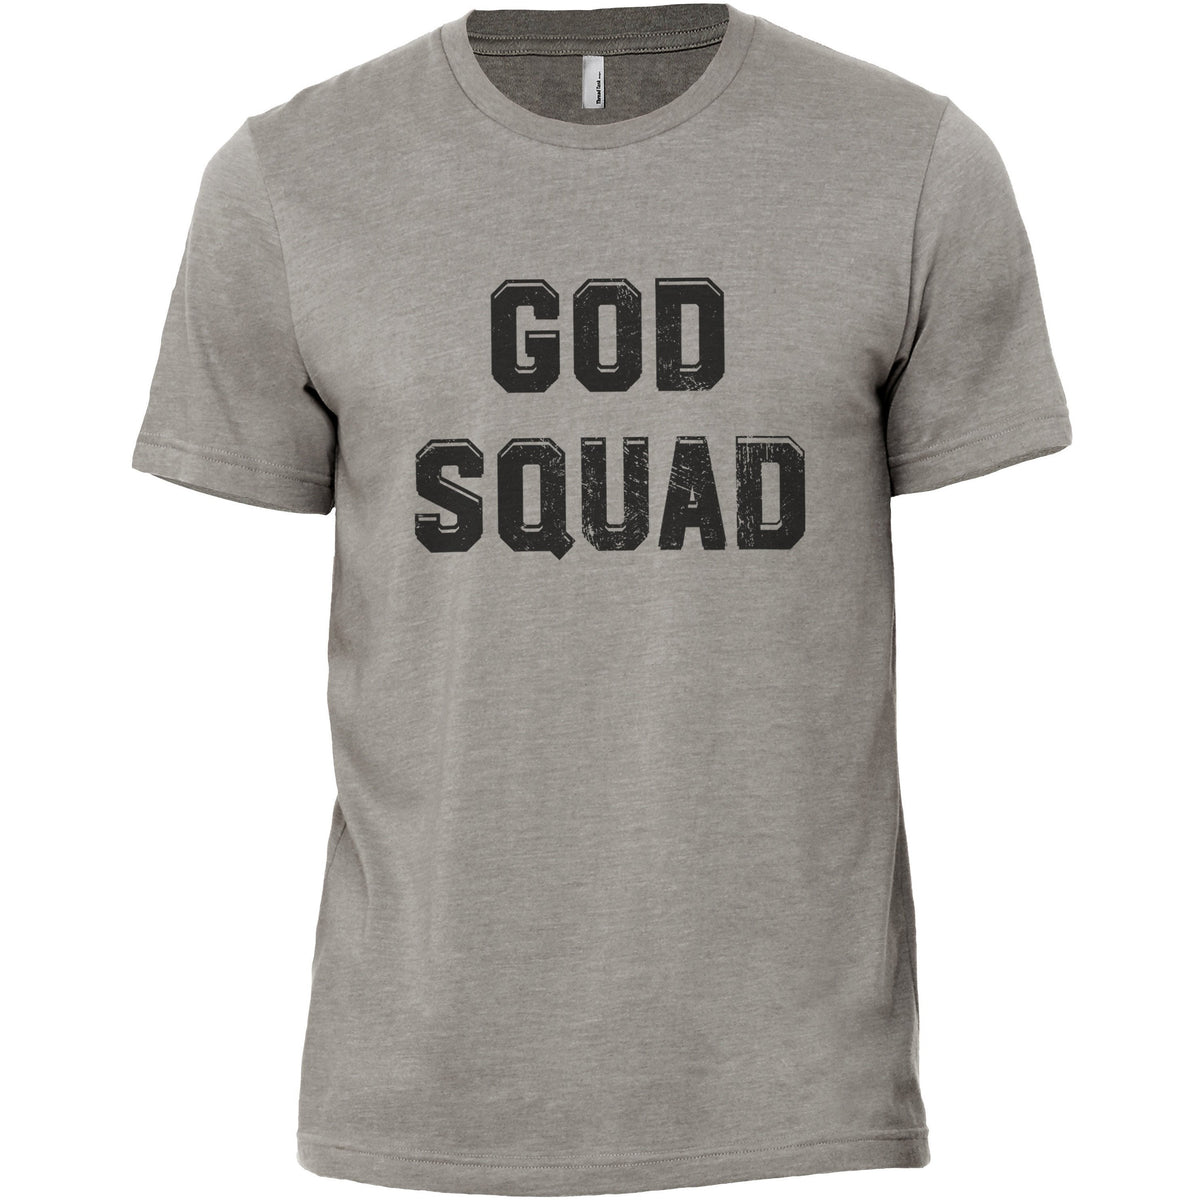 God Squad Printed Graphic Men's Crew T-shirt Tee - Stories You Can Wear